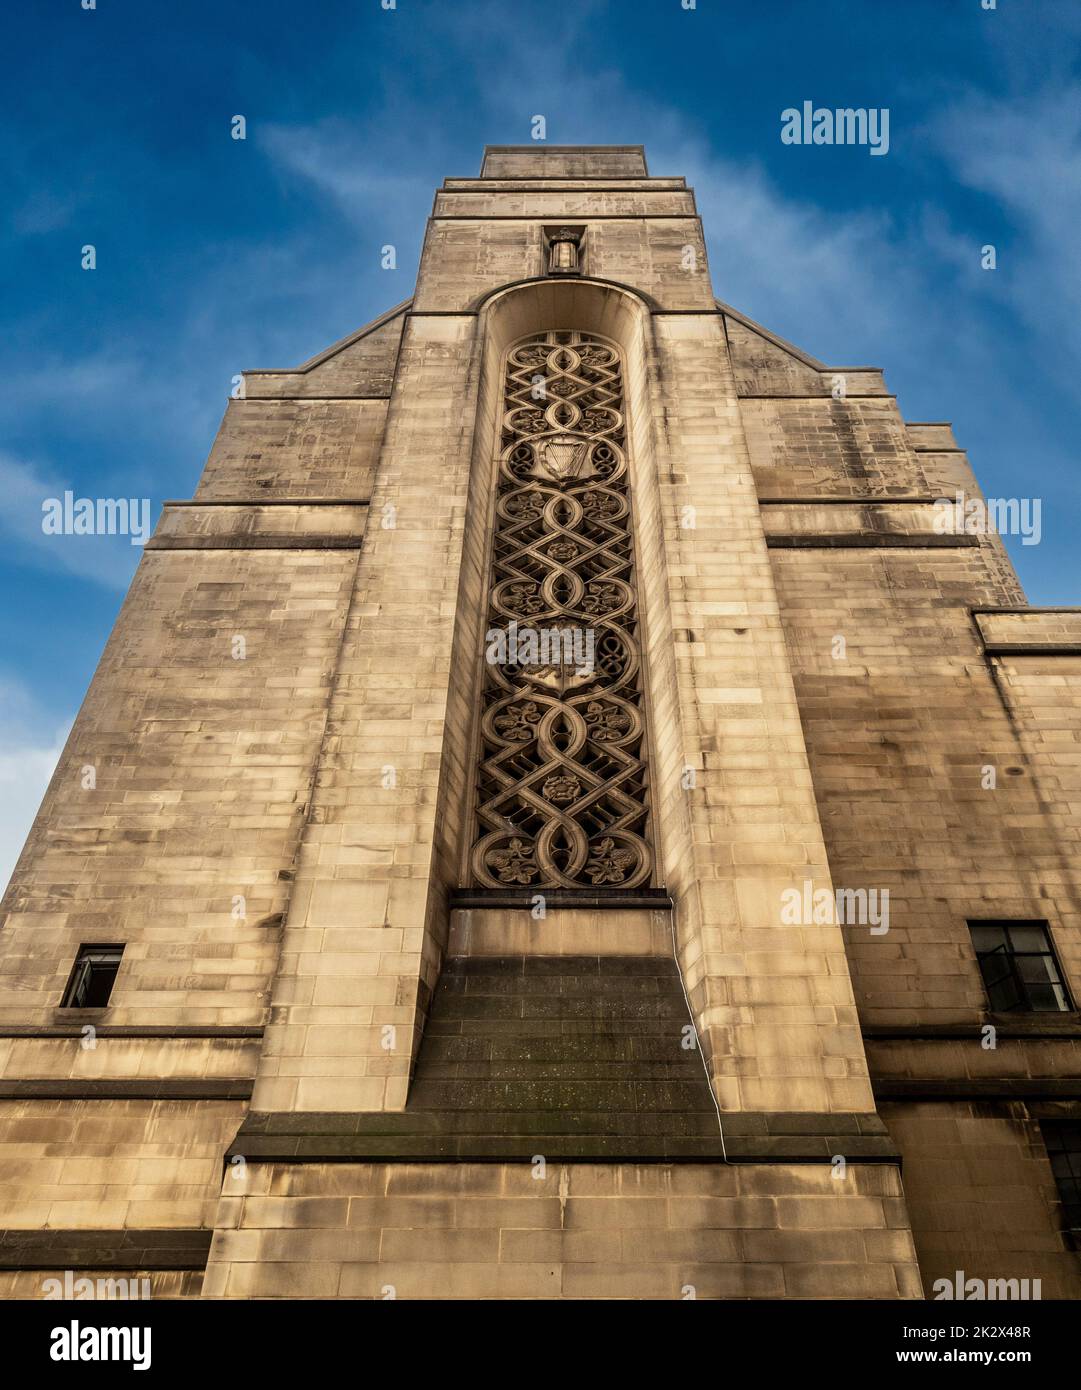 Town Hall Extension elaborate geometrically traceried windows. Shot from ground level looking upwards. Manchester. UK Stock Photo